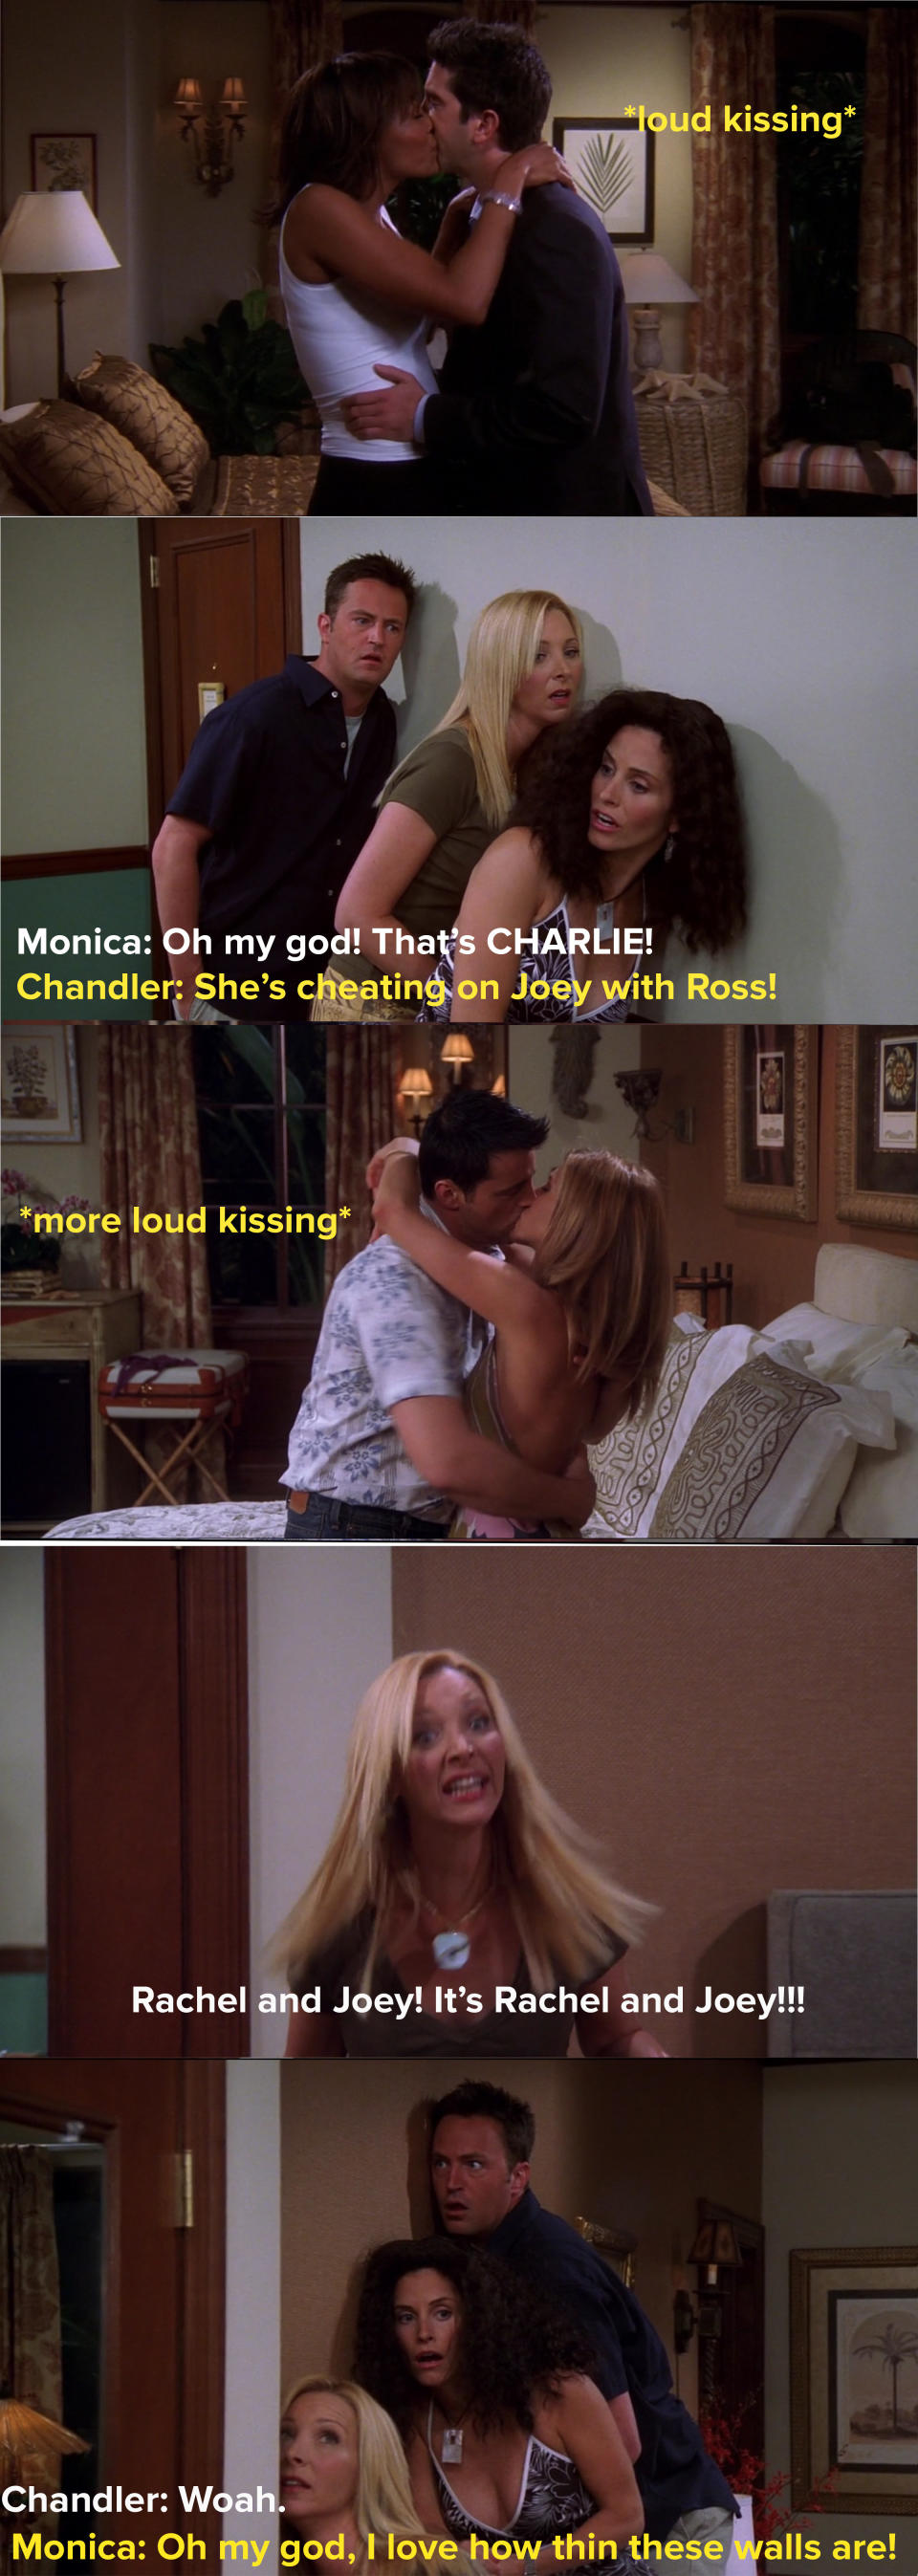 Charlie and Ross are kissing in one room and Rachel and Joey in another, and Pheobe, Monica and Chandler can hear them all through the walls so they freak out because they didn't know any of these people were together